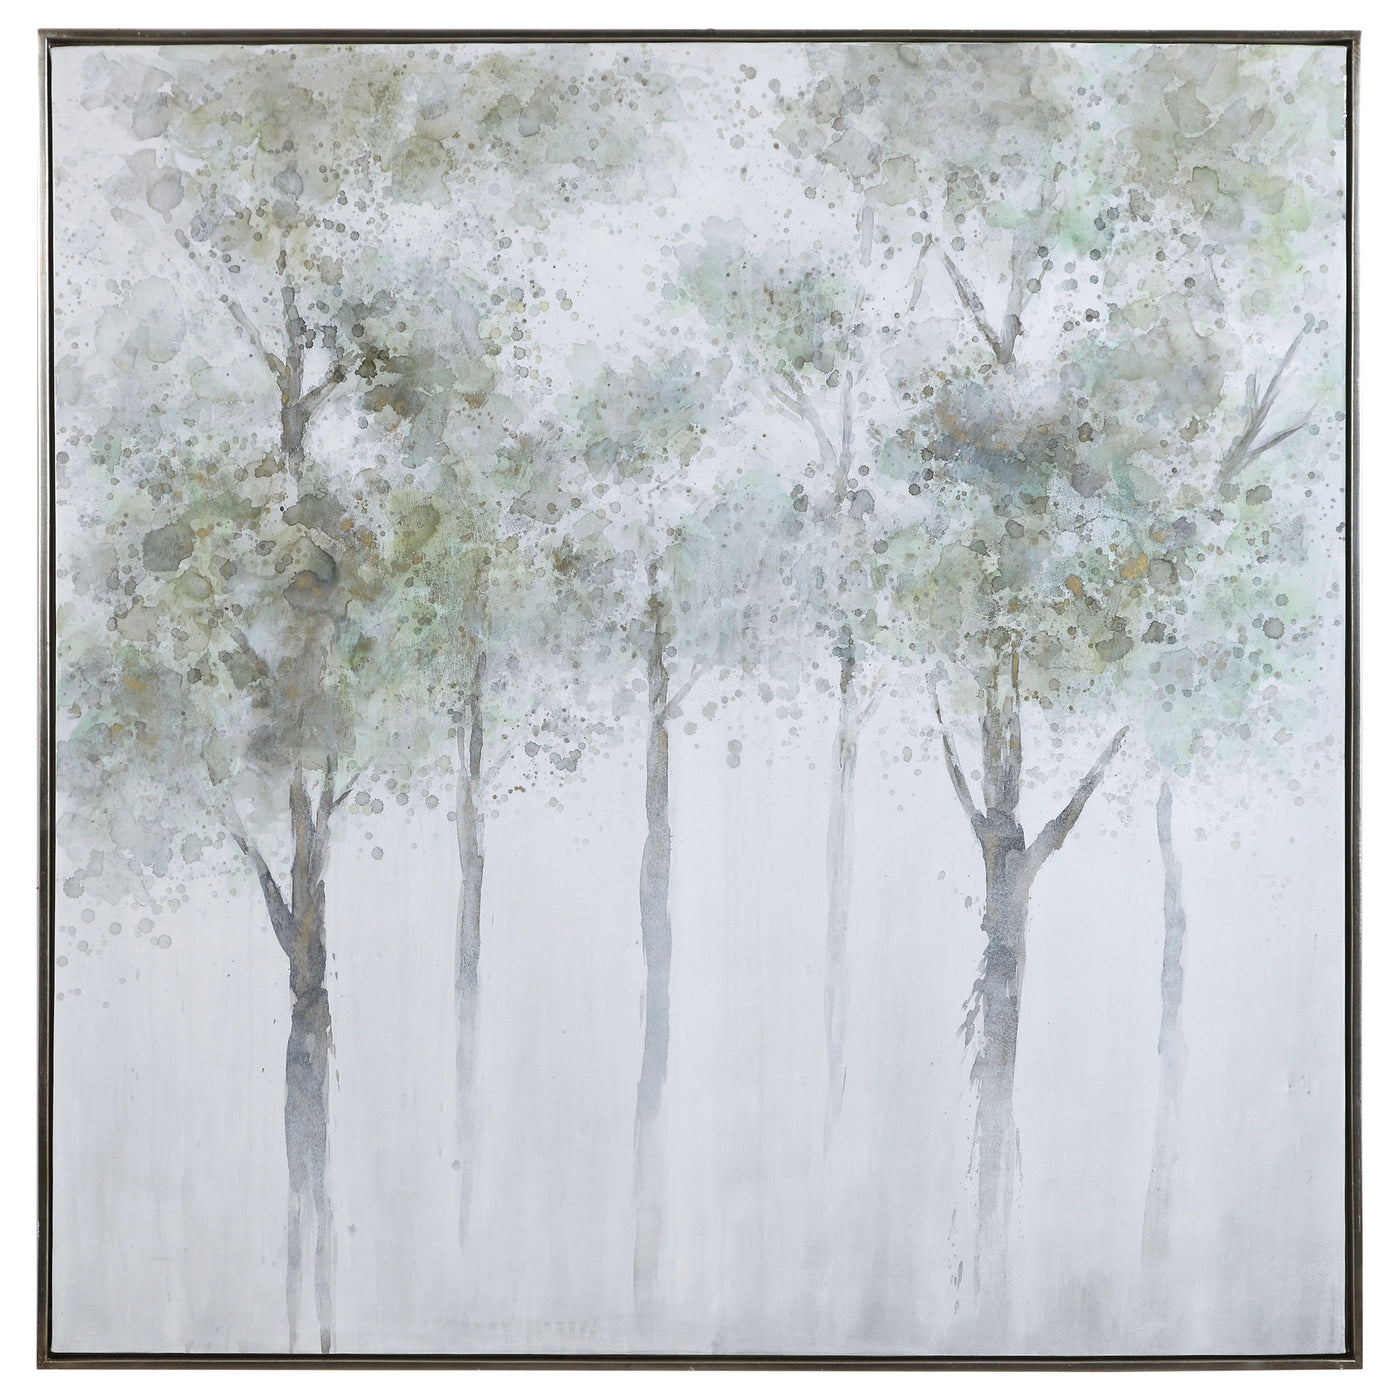 Hand Painted Forest Scene On Canvas Showcases A Watercolor Style With Soft Sage Green, Yellow And Gray Tones And A Silver ...